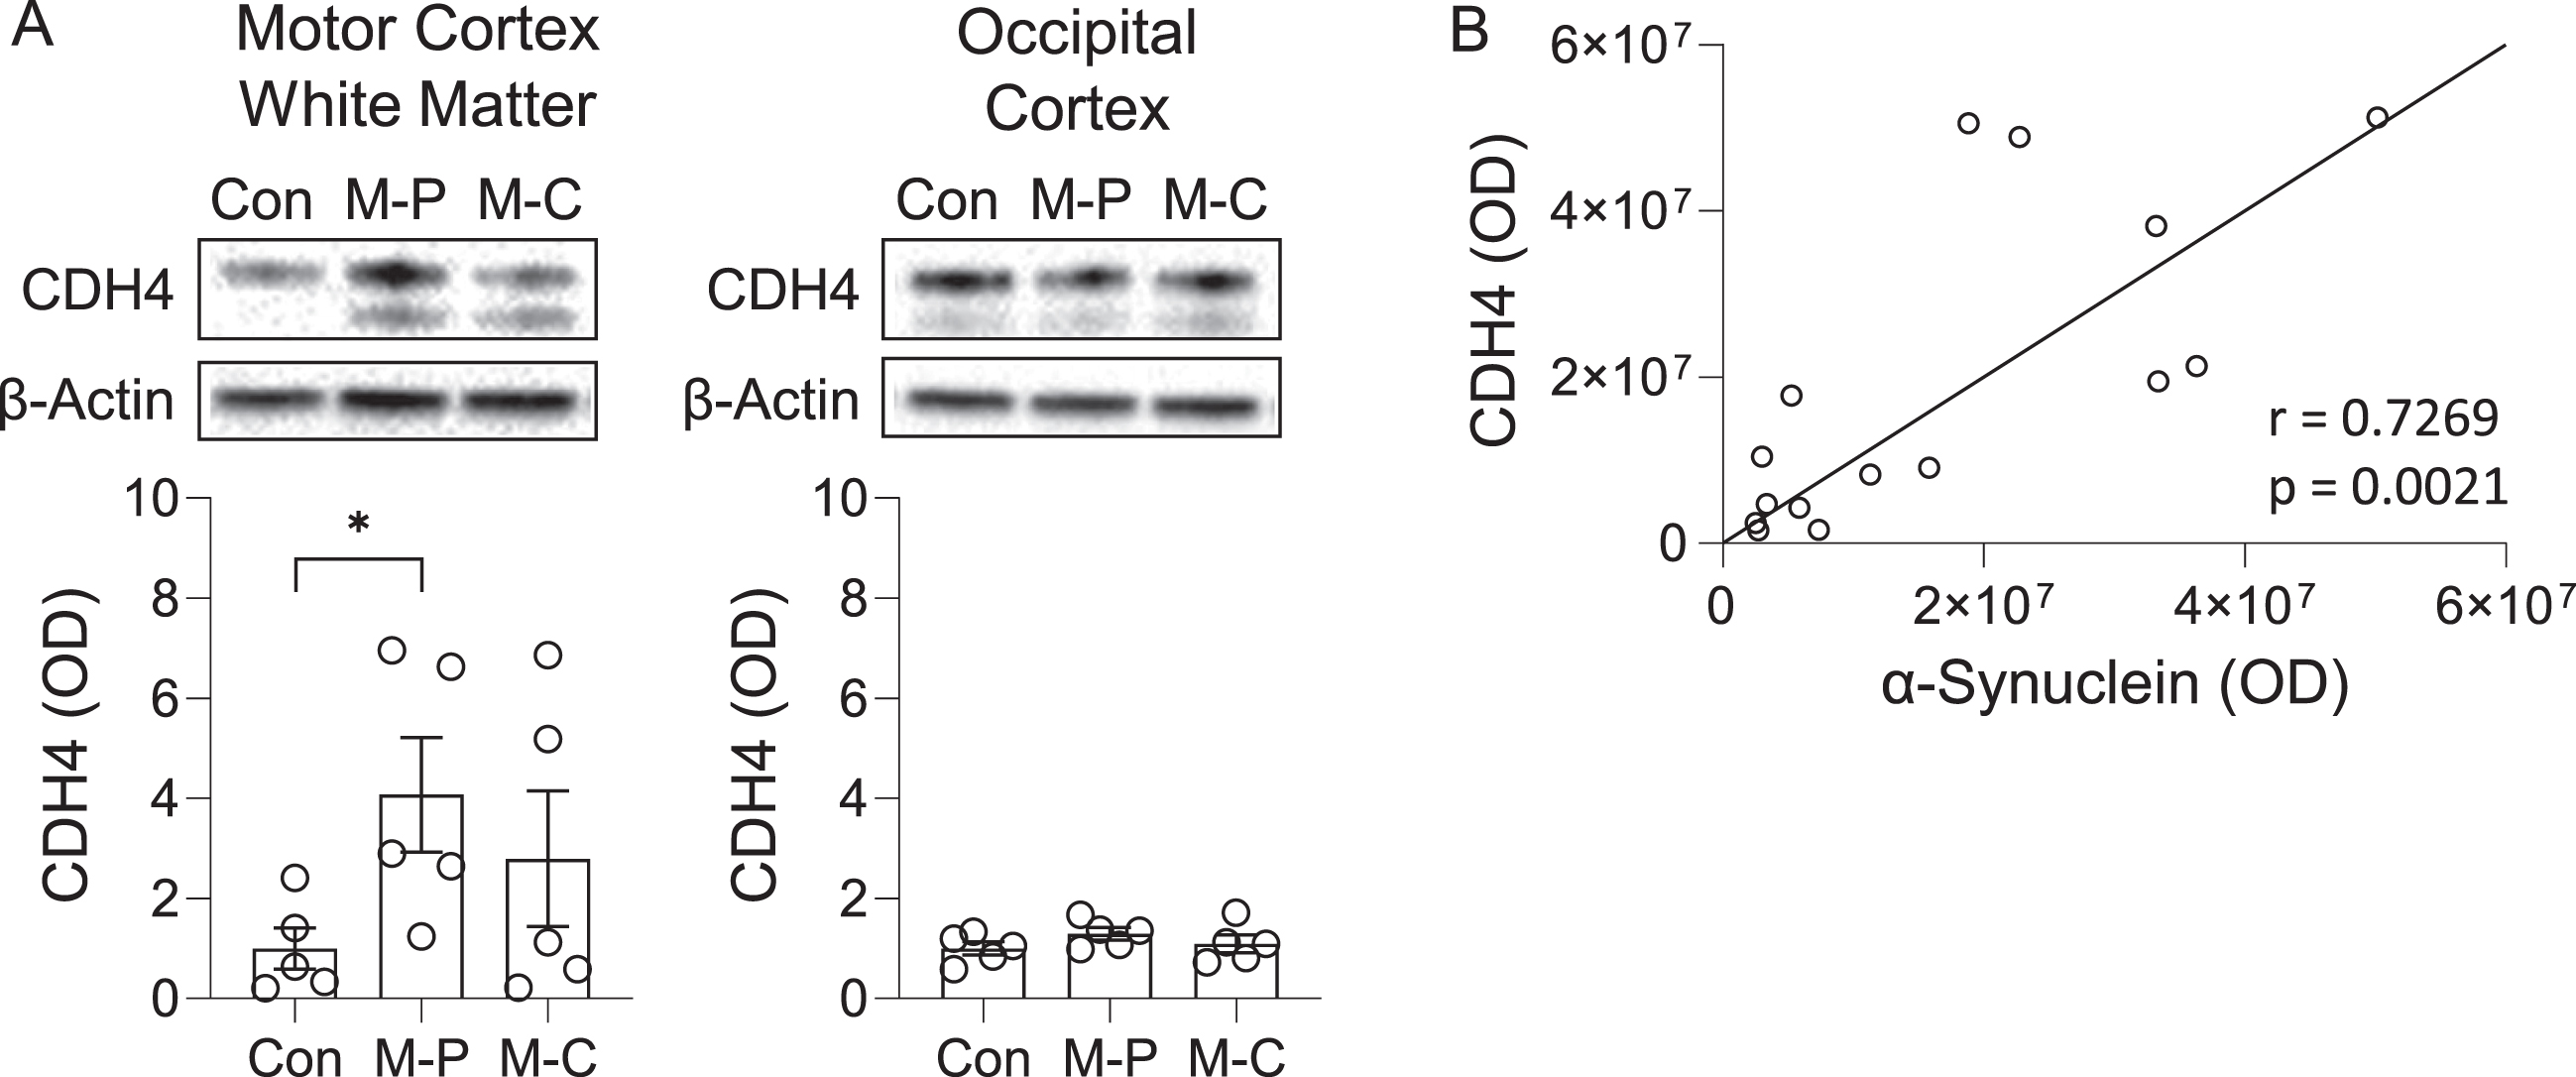 CDH4 protein expression in control and MSA brain. A) CDH4 protein expression in control (Con), MSA-P (M-P), and MSA-C (M-C) in the motor cortex white matter and superior occipital cortex as measured by western blotting. The CDH4 bands were normalized to β-actin. Data represent mean and SE as error bars; *p < 0.05. B) Correlation of CDH4 and α-synuclein protein levels in the motor cortex white matter.